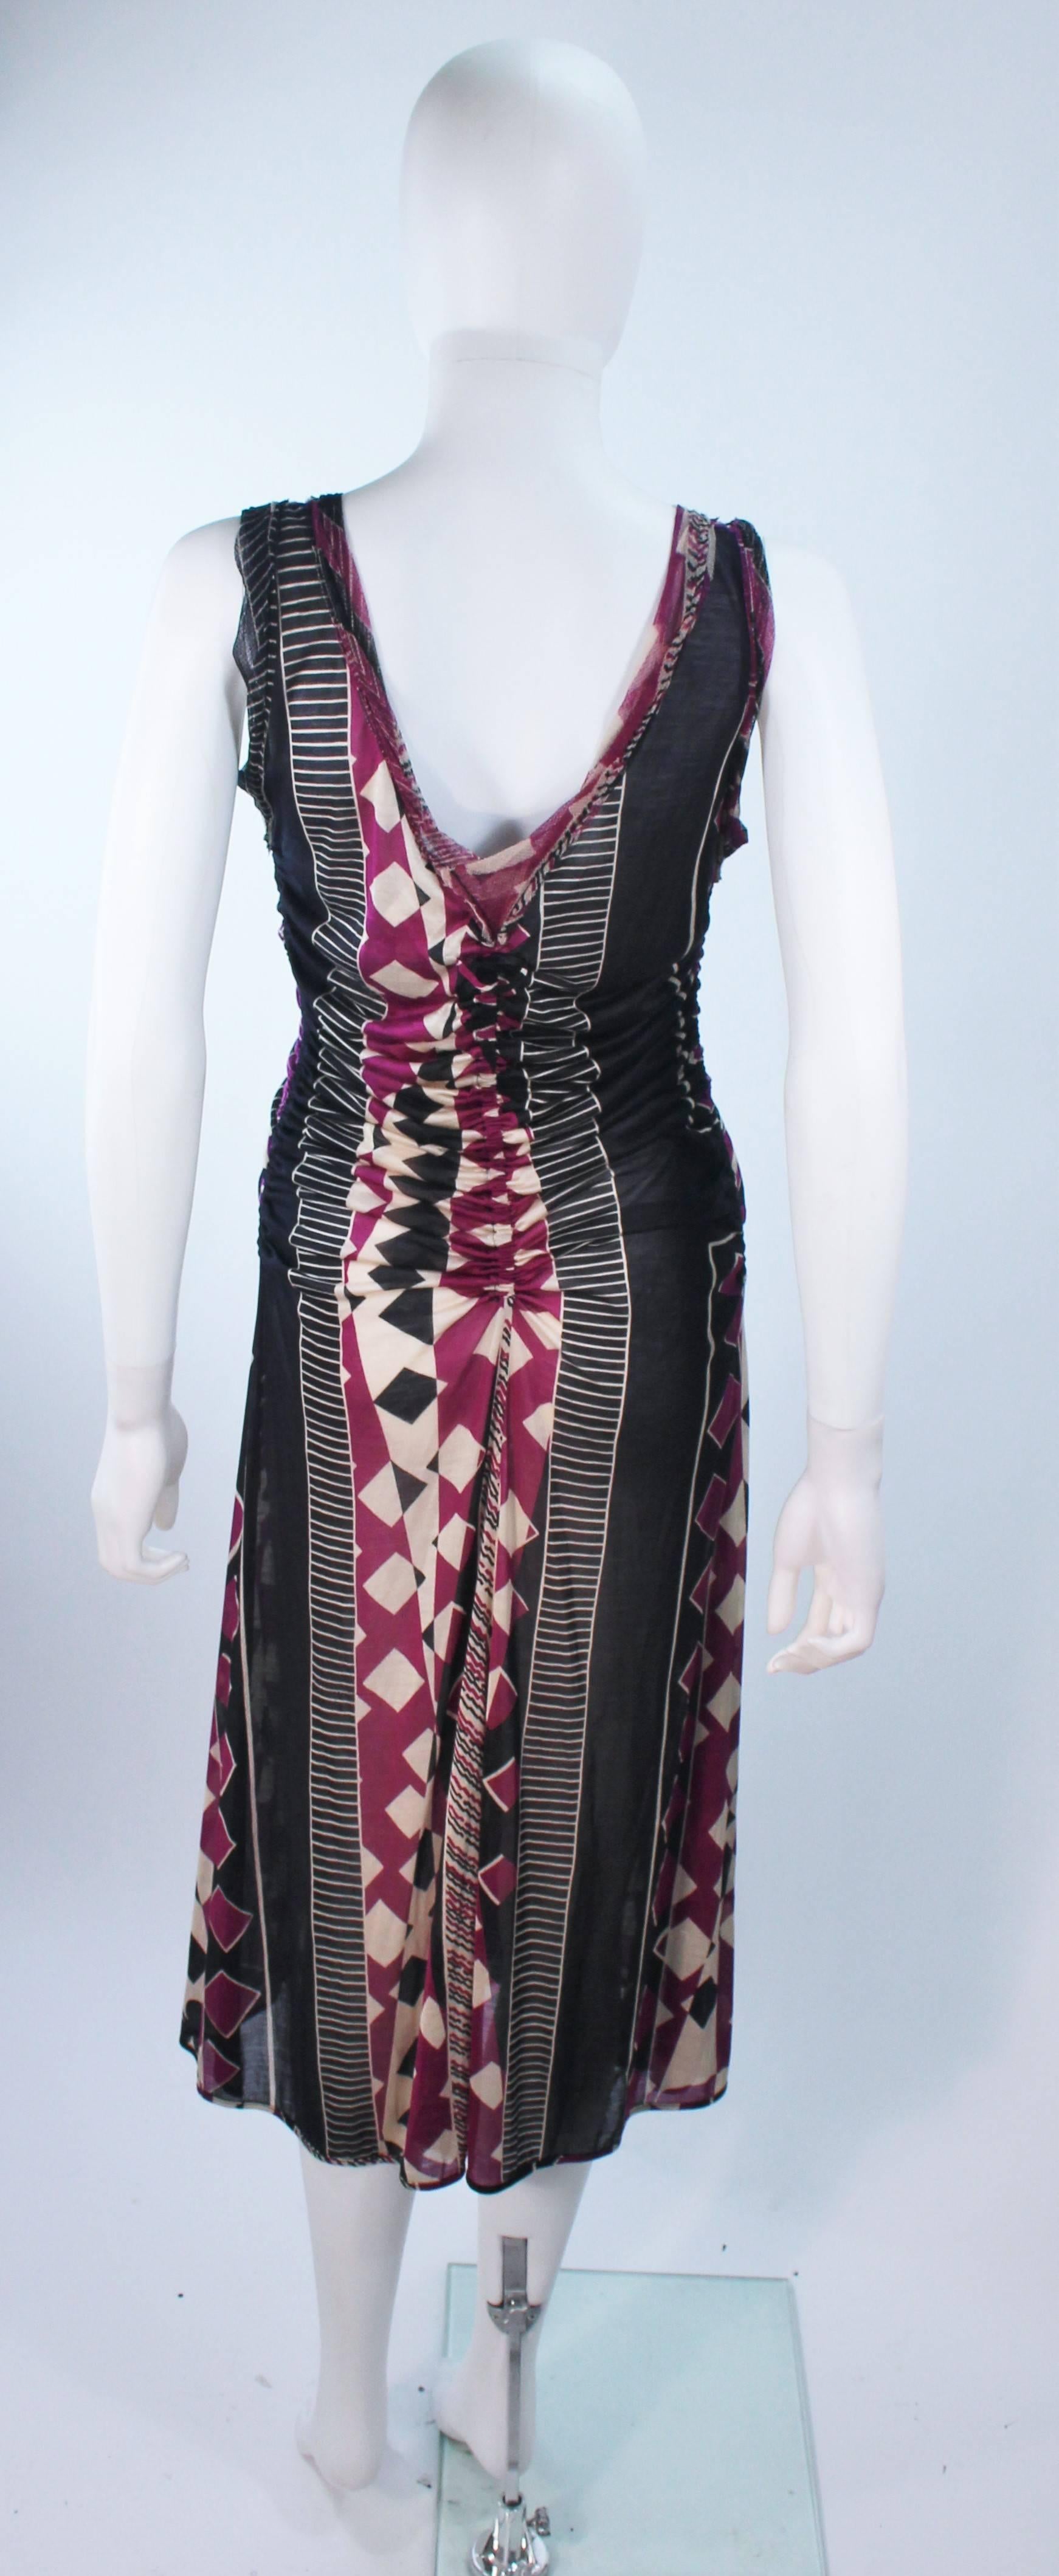 JEAN PAUL GAULTIER Sheer Pink and Black Geometric Pattern Cocktail Dress Size M 5